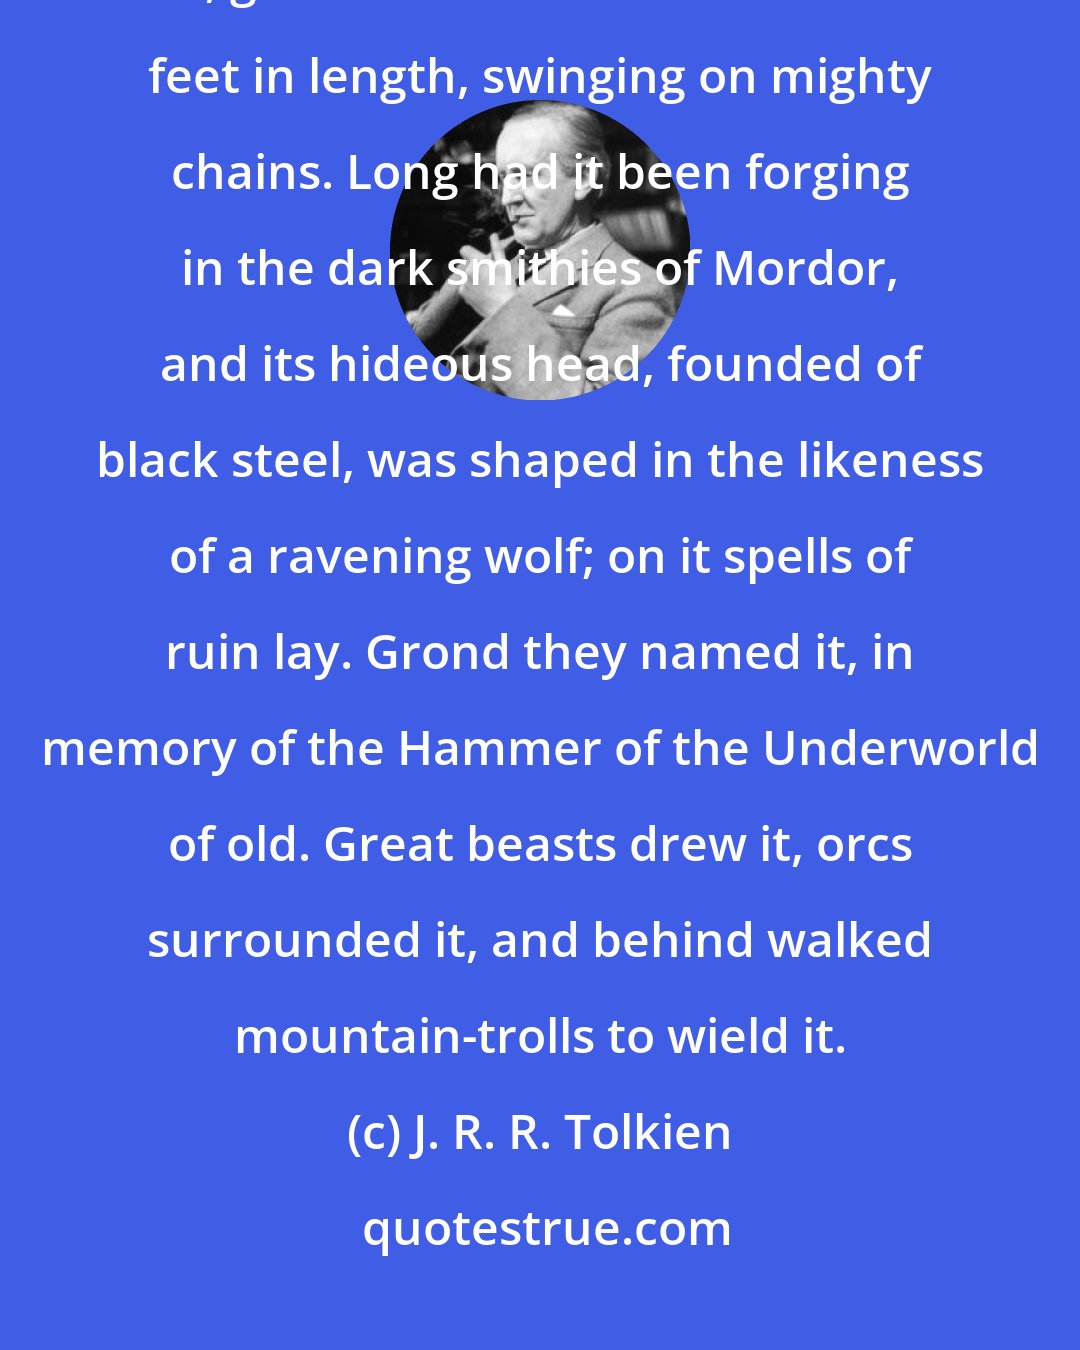 J. R. R. Tolkien: Great engines crawled across the field; and in the midst was a huge ram, great as a forest-tree a hundred feet in length, swinging on mighty chains. Long had it been forging in the dark smithies of Mordor, and its hideous head, founded of black steel, was shaped in the likeness of a ravening wolf; on it spells of ruin lay. Grond they named it, in memory of the Hammer of the Underworld of old. Great beasts drew it, orcs surrounded it, and behind walked mountain-trolls to wield it.